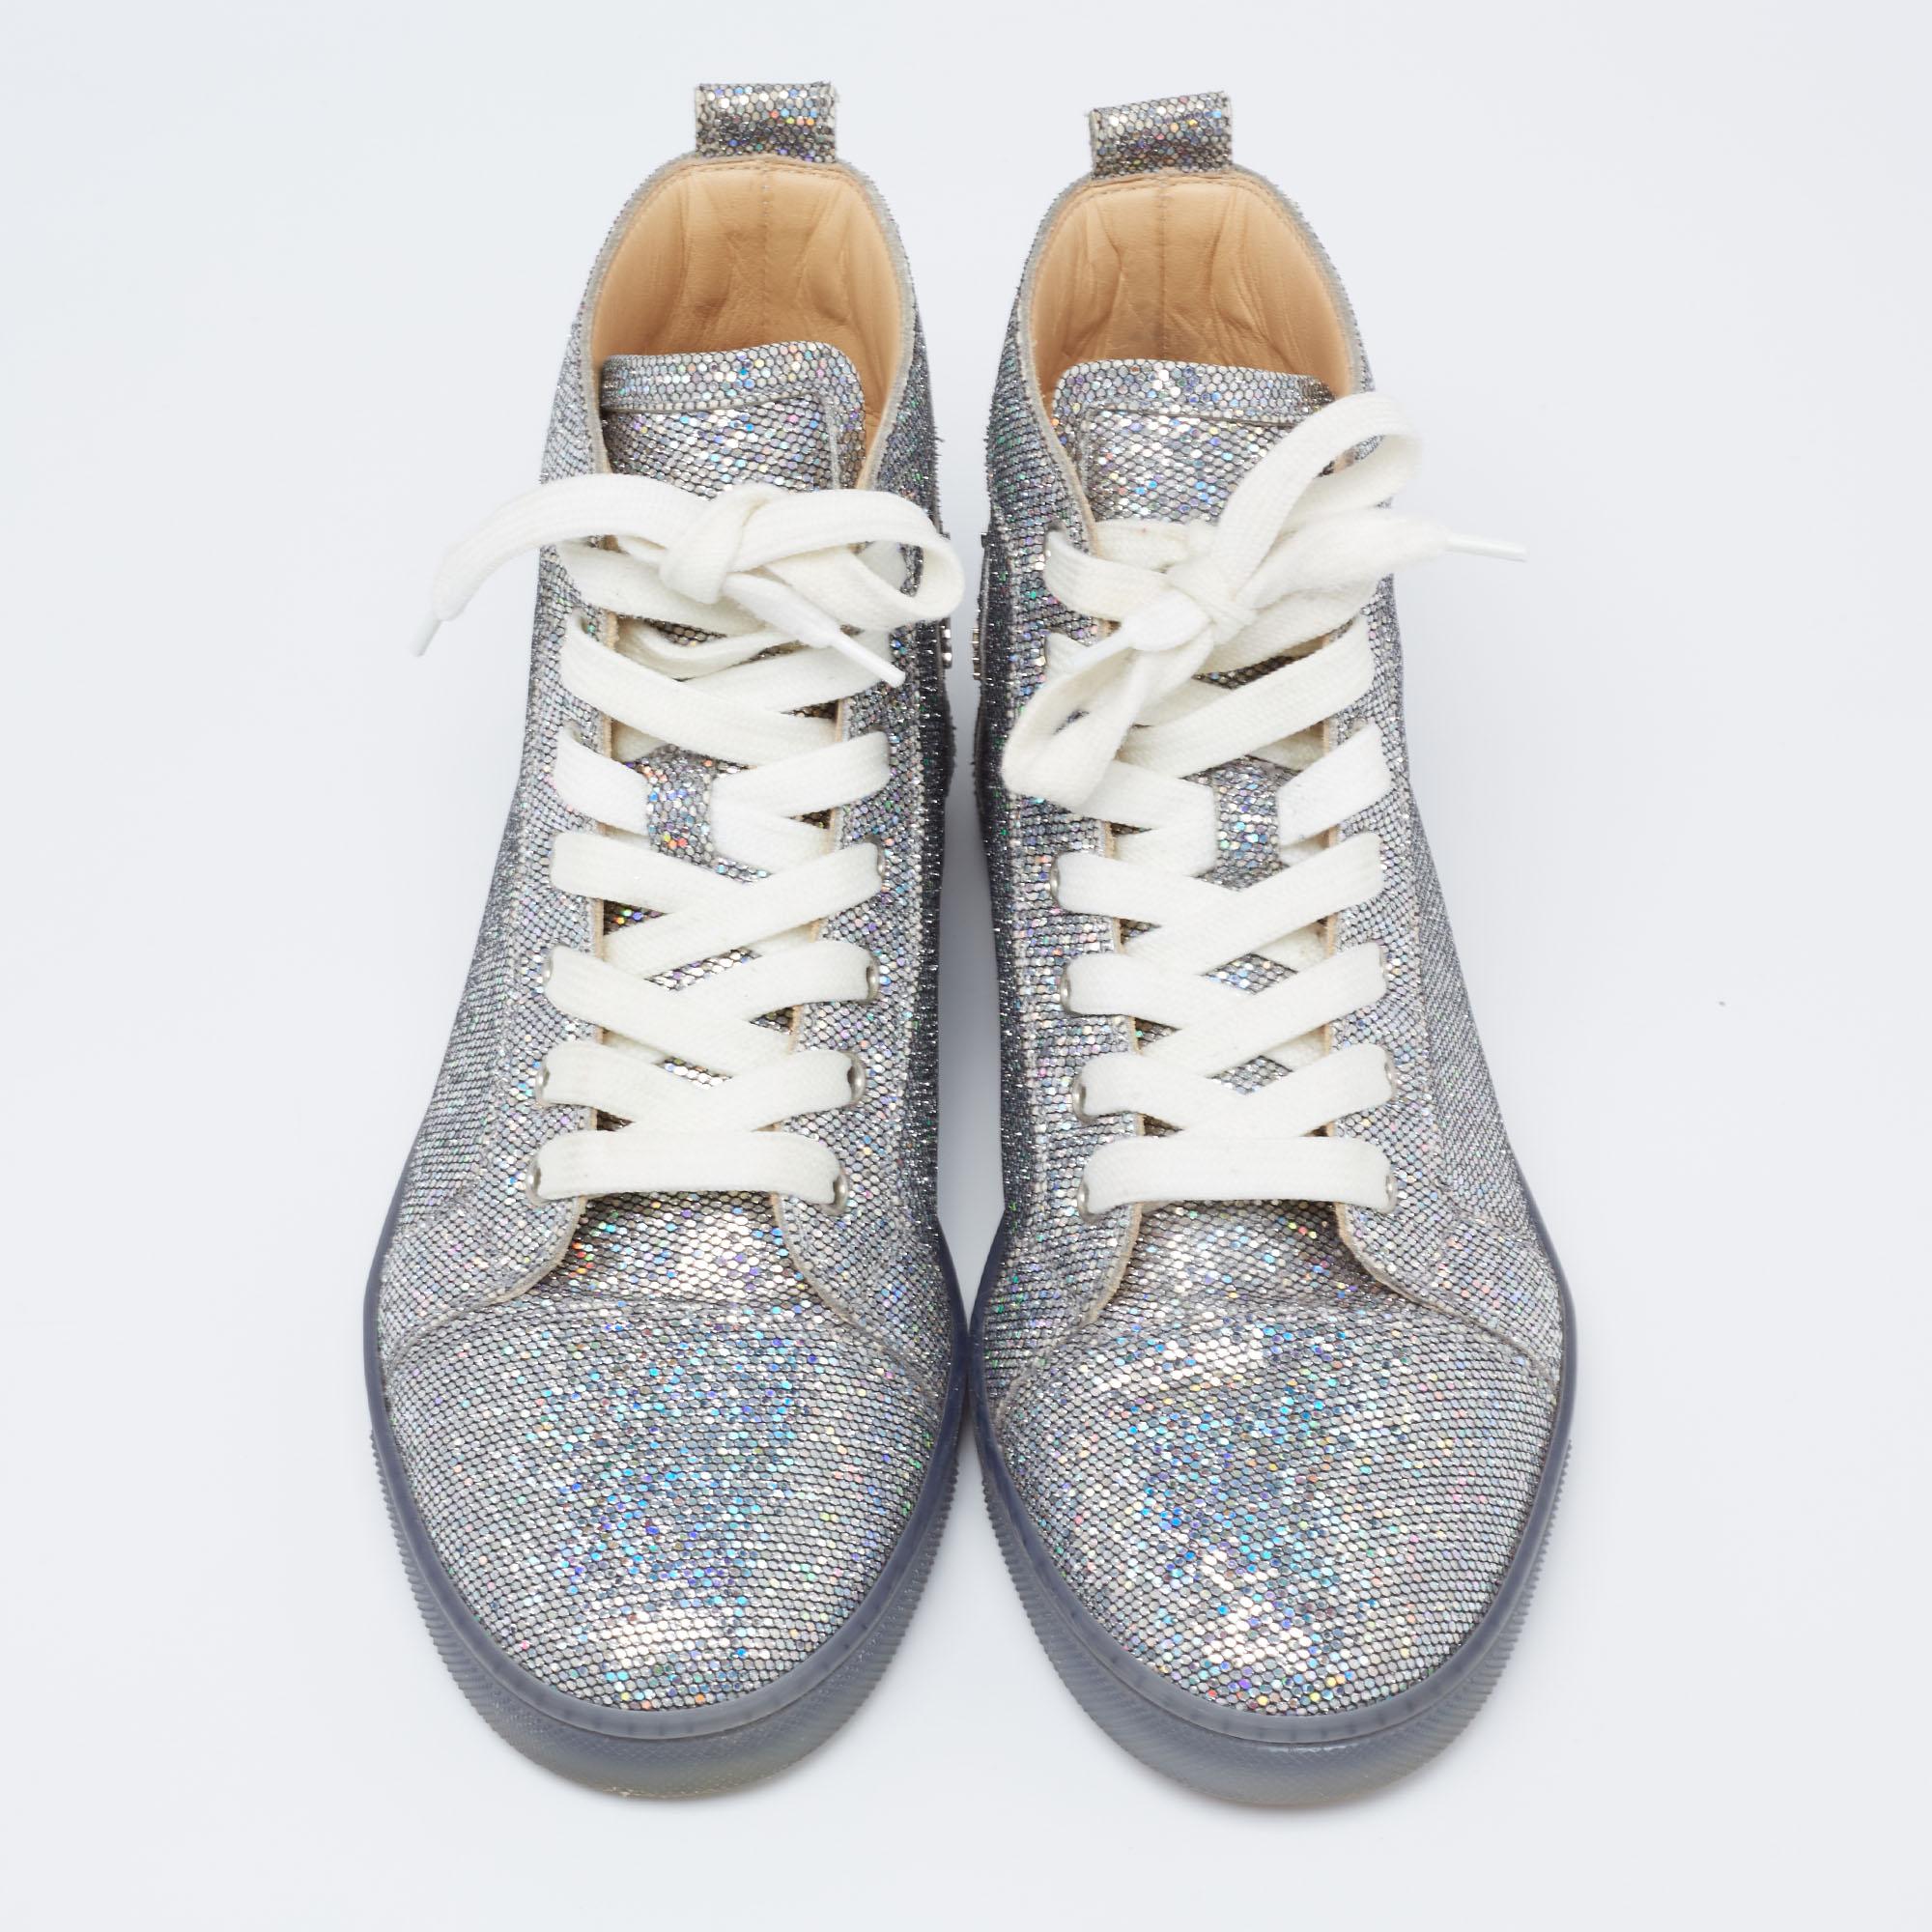 Pull off a stylish look with ease in this pair of high top sneakers from Christian Louboutin. Crafted from glimmering silver glitter, this pair truly embodies luxury and comfort. They feature lace-ups, leather insoles, and durable rubber soles.

